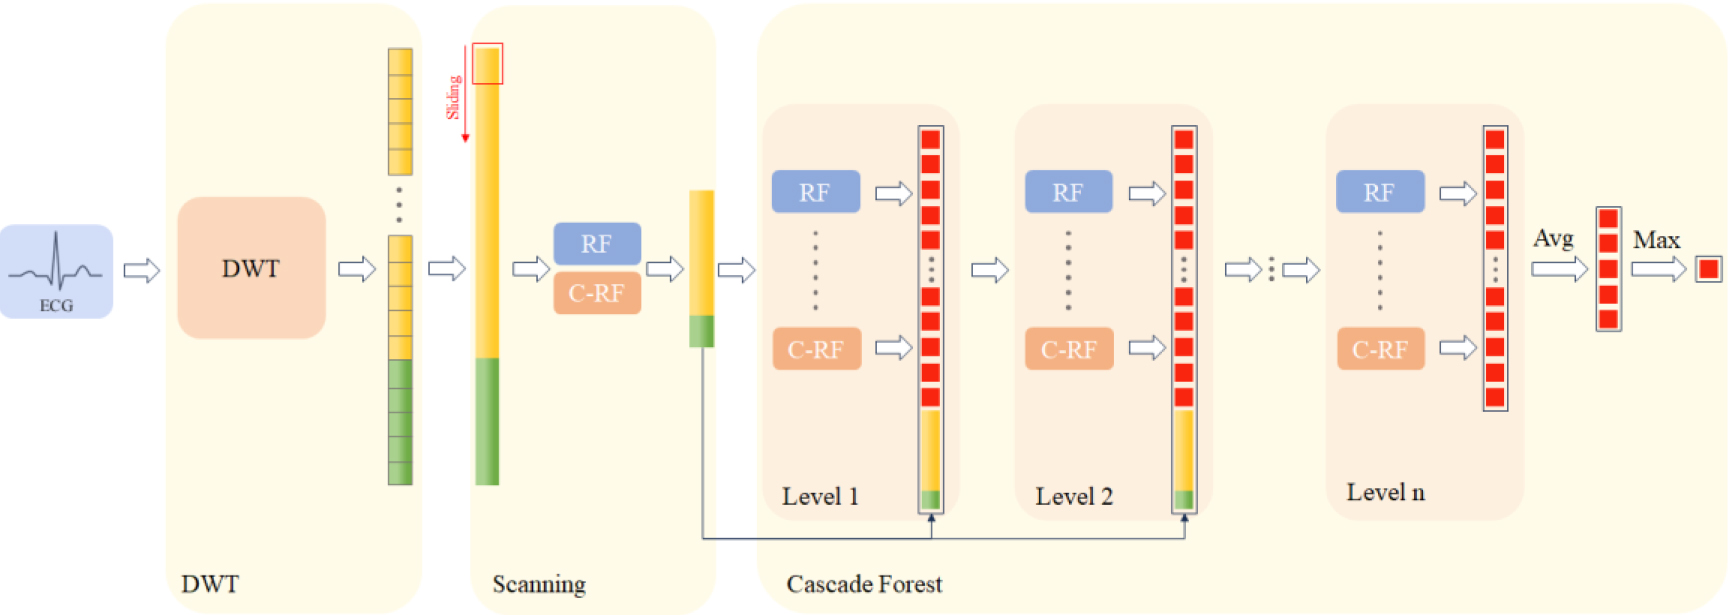 DWT-based gcforest structure.